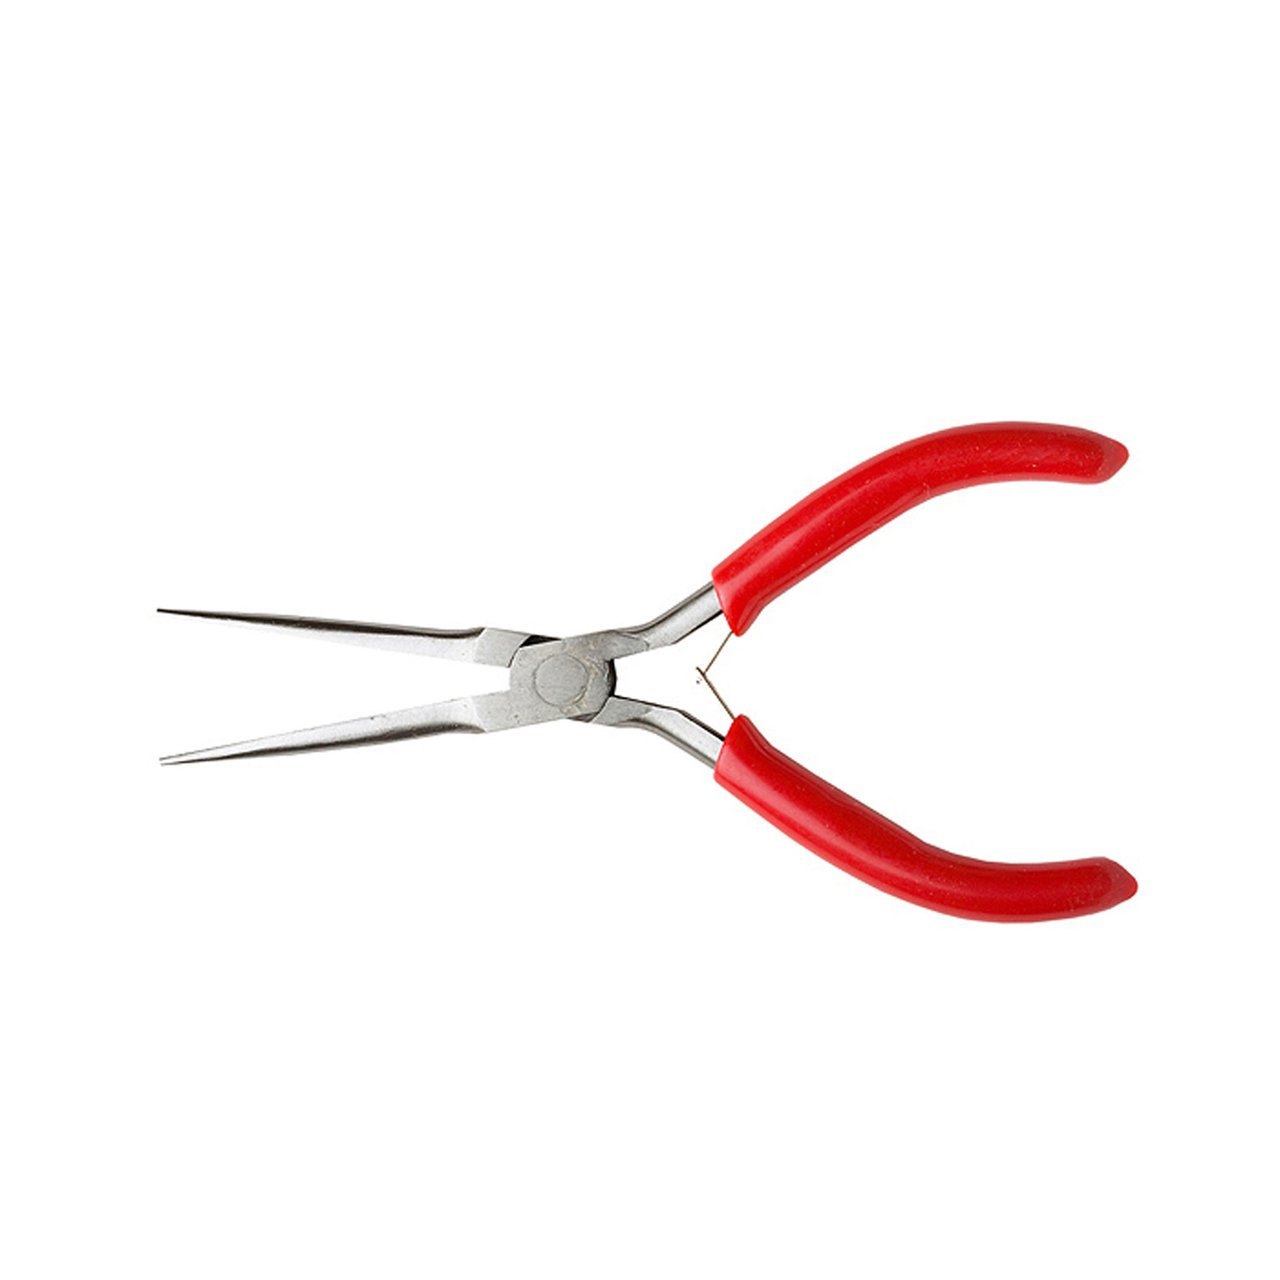 5.5 inch Needle Nose Pliers